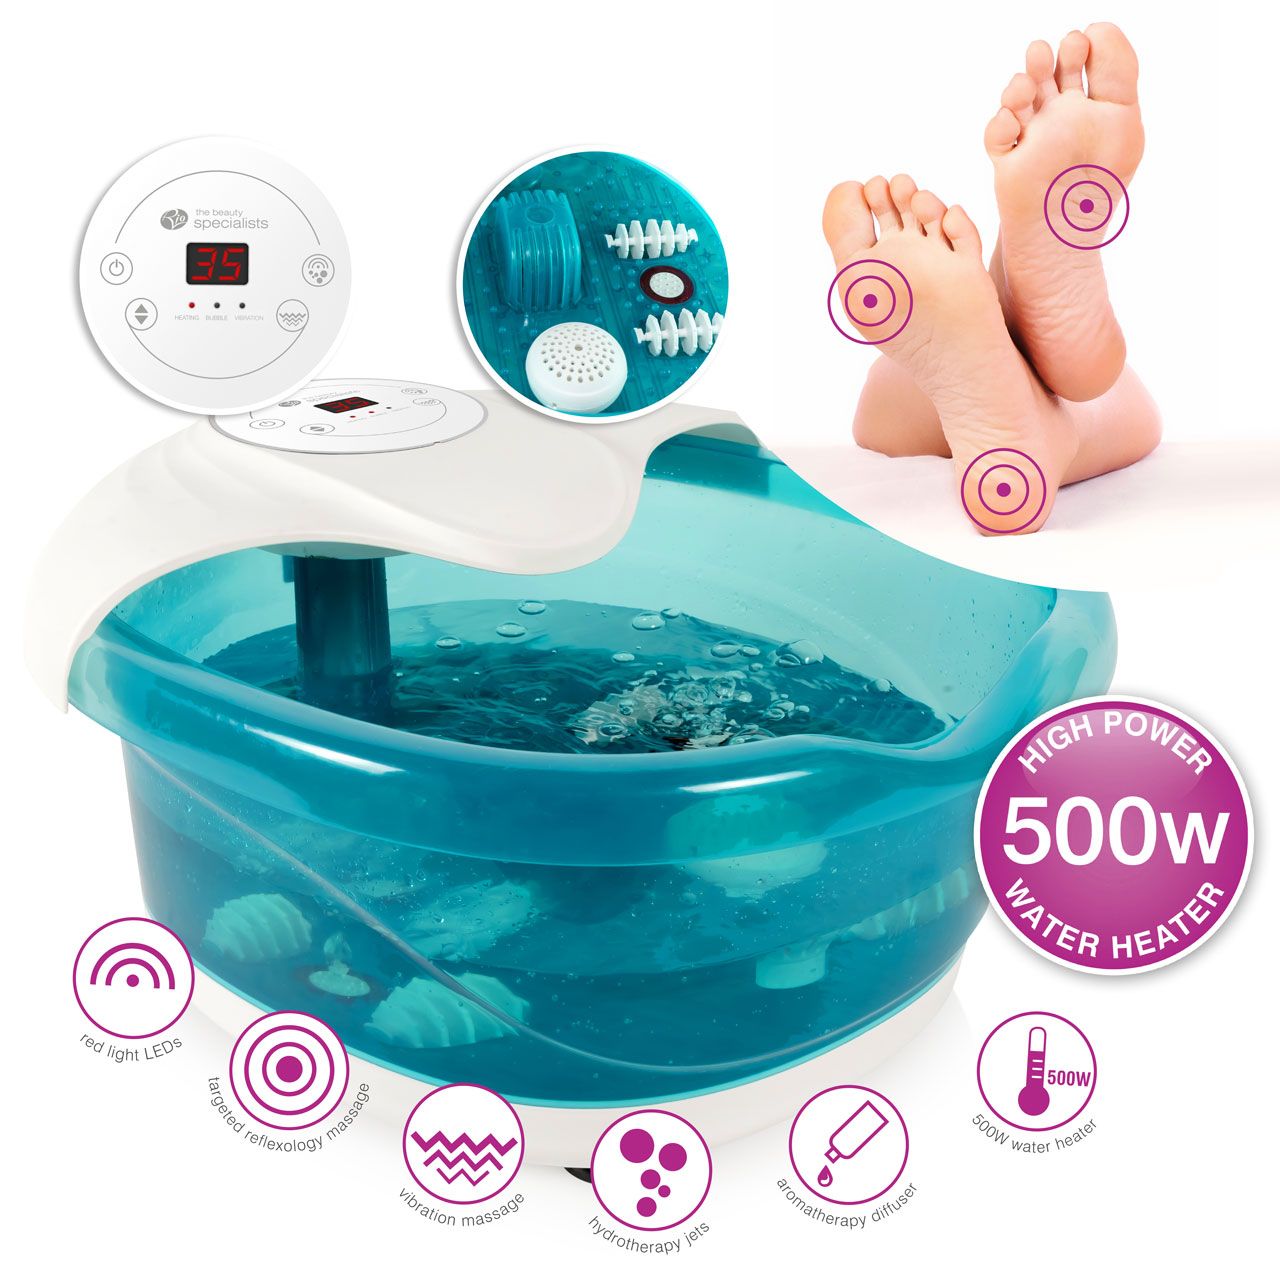 Luxury foot bath spa and massager with hotspot images of digital display screen and inside of footbath with icons listing features: red light LEDs, targeted reflexology massage, vibration massage, hydrotherapy jets, aromatherapy diffuser, 500w water heater